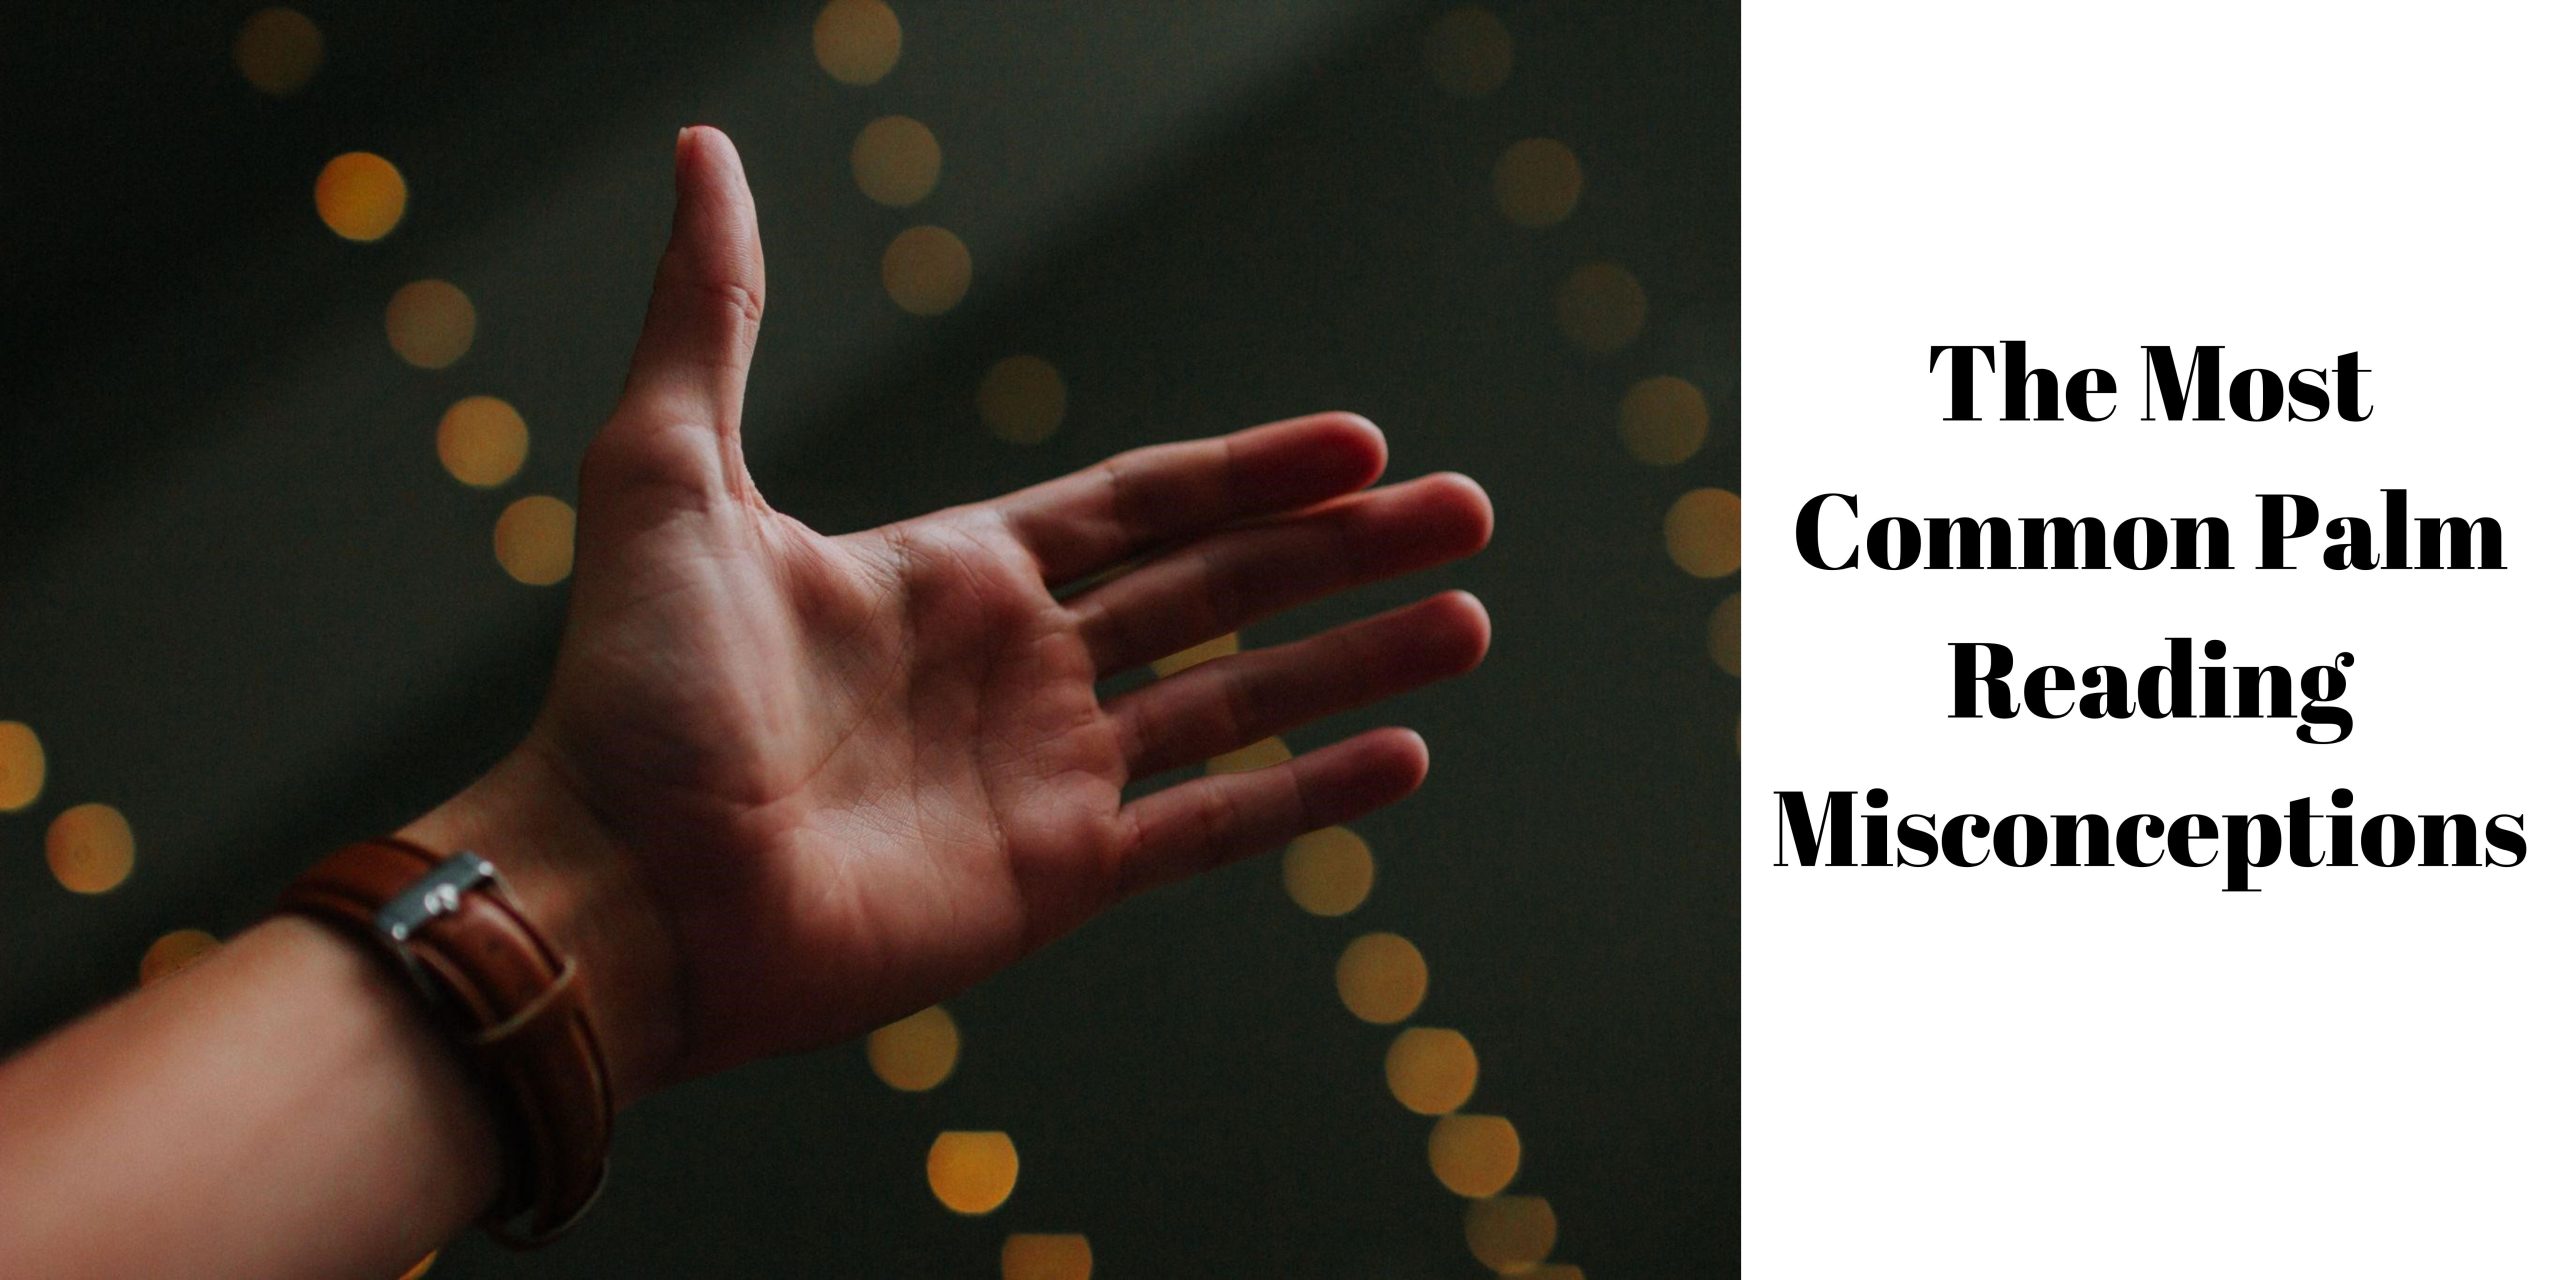 The Most Common Palm Reading Misconceptions